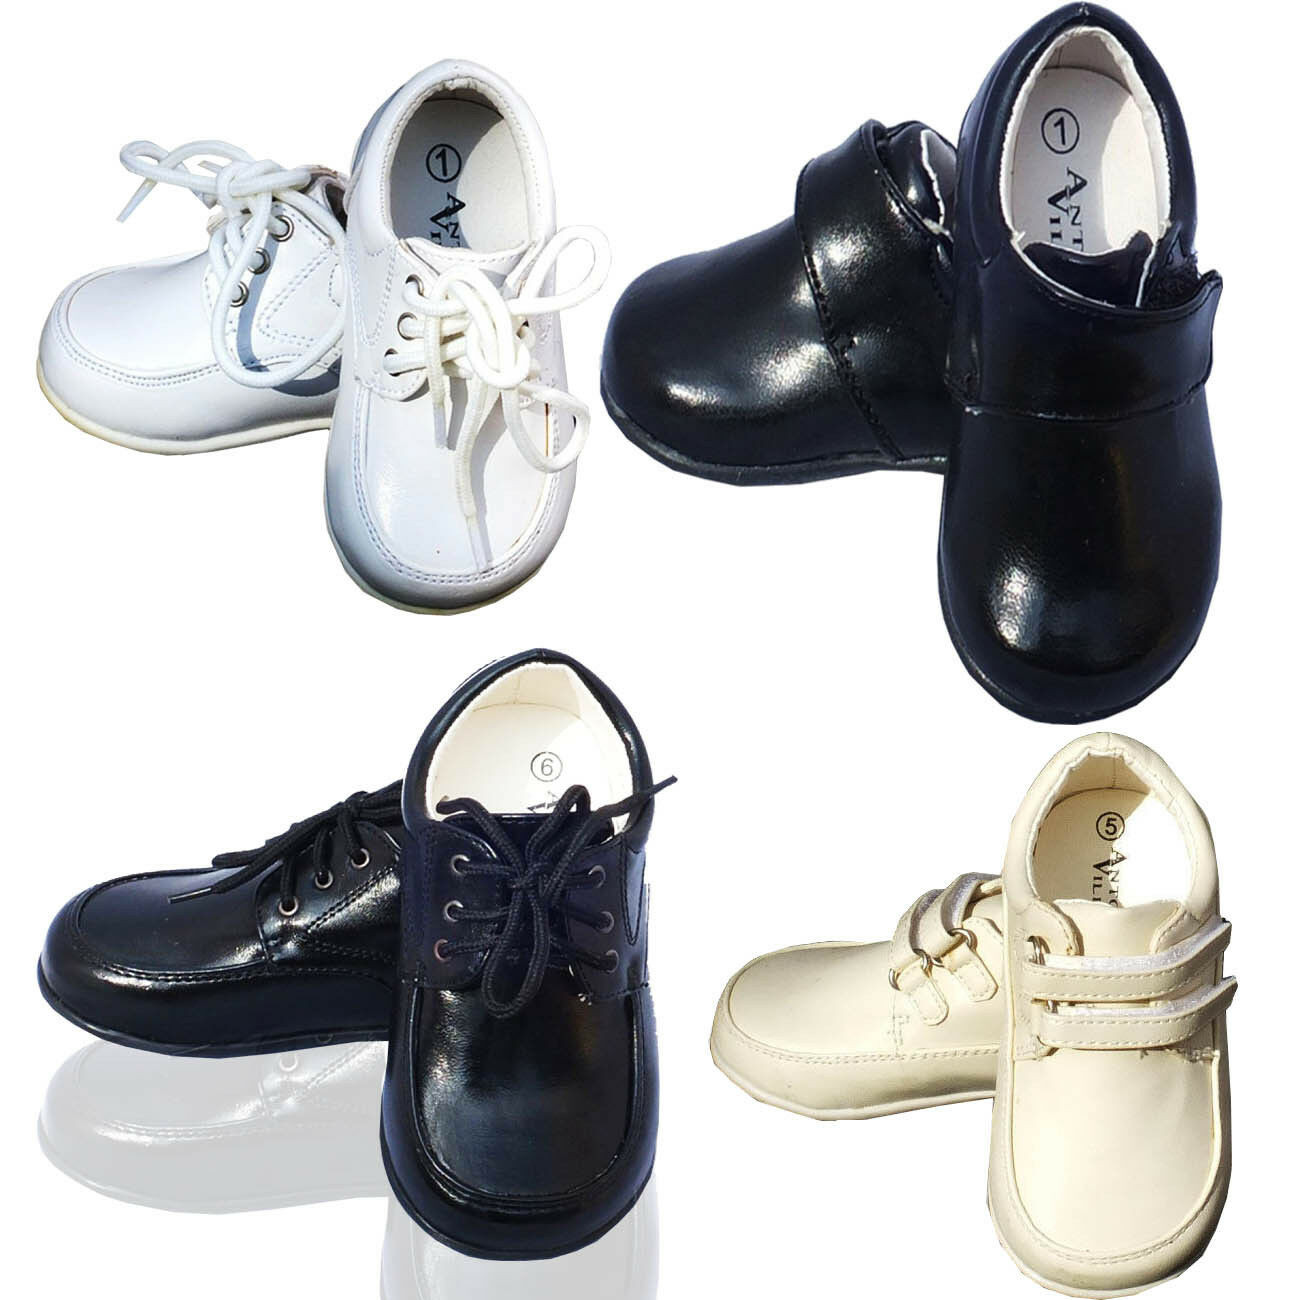 Toddler Wedding Shoes
 Baby Boys Formal Shoes Toddler White Ivory Black Shoes